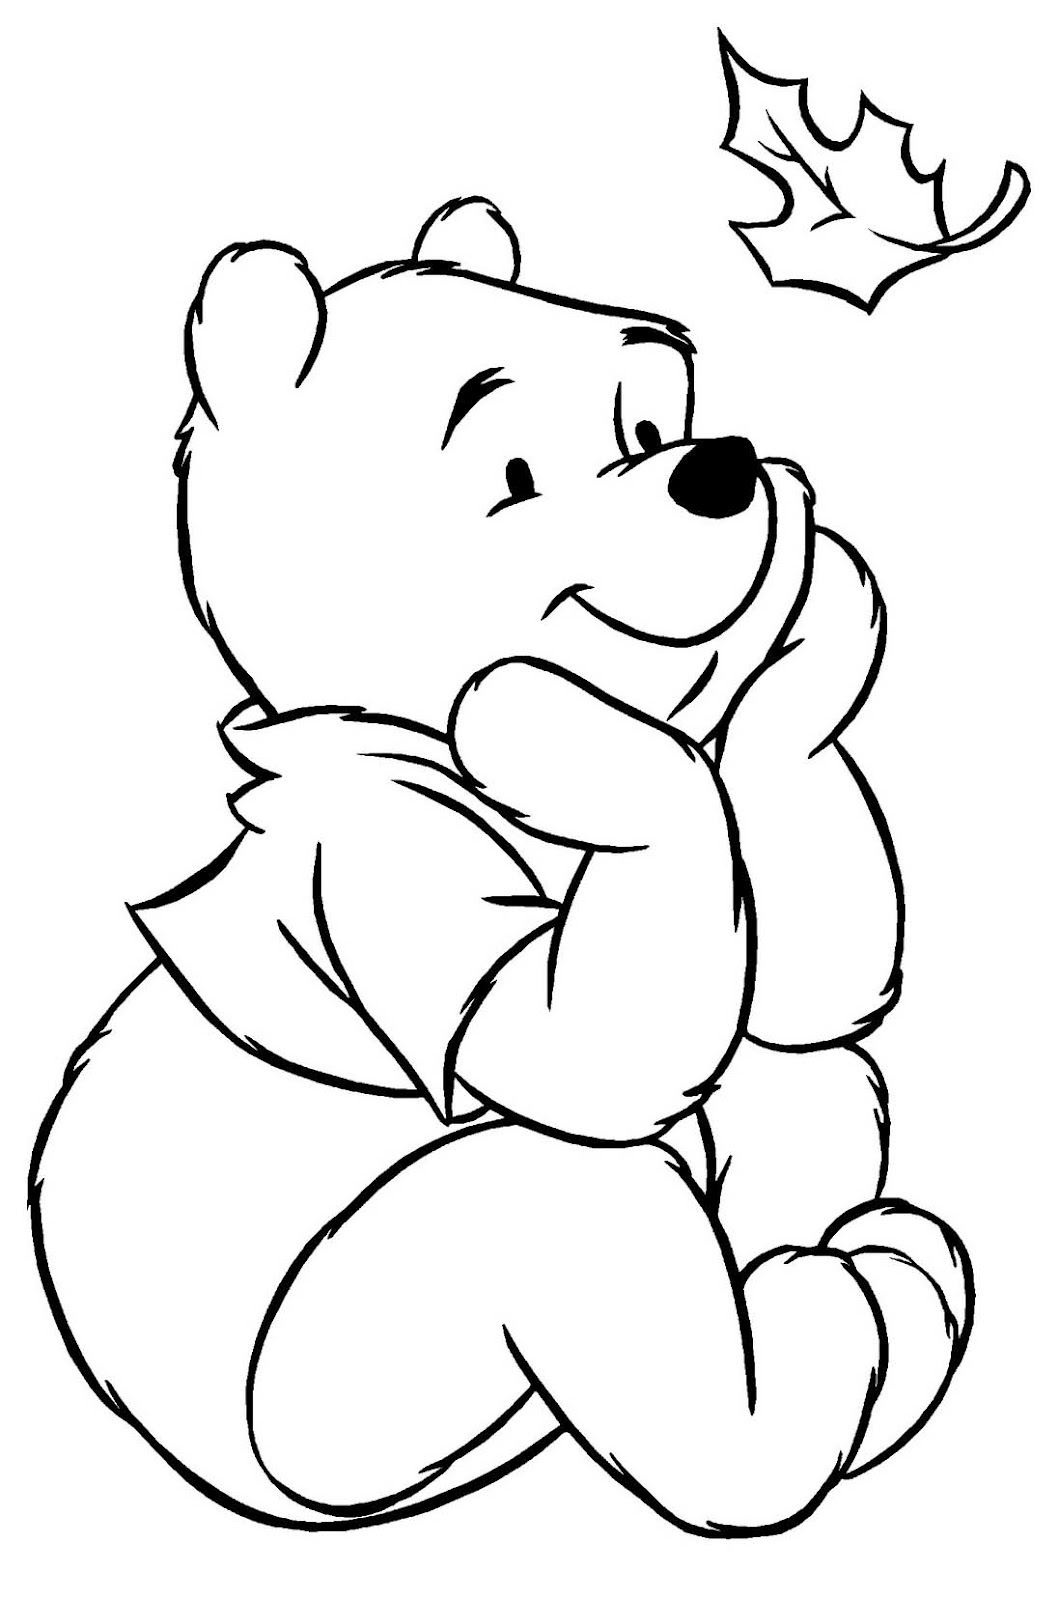 disney character coloring pages disney animal winnie the pooh characters coloring pages pages disney character coloring 